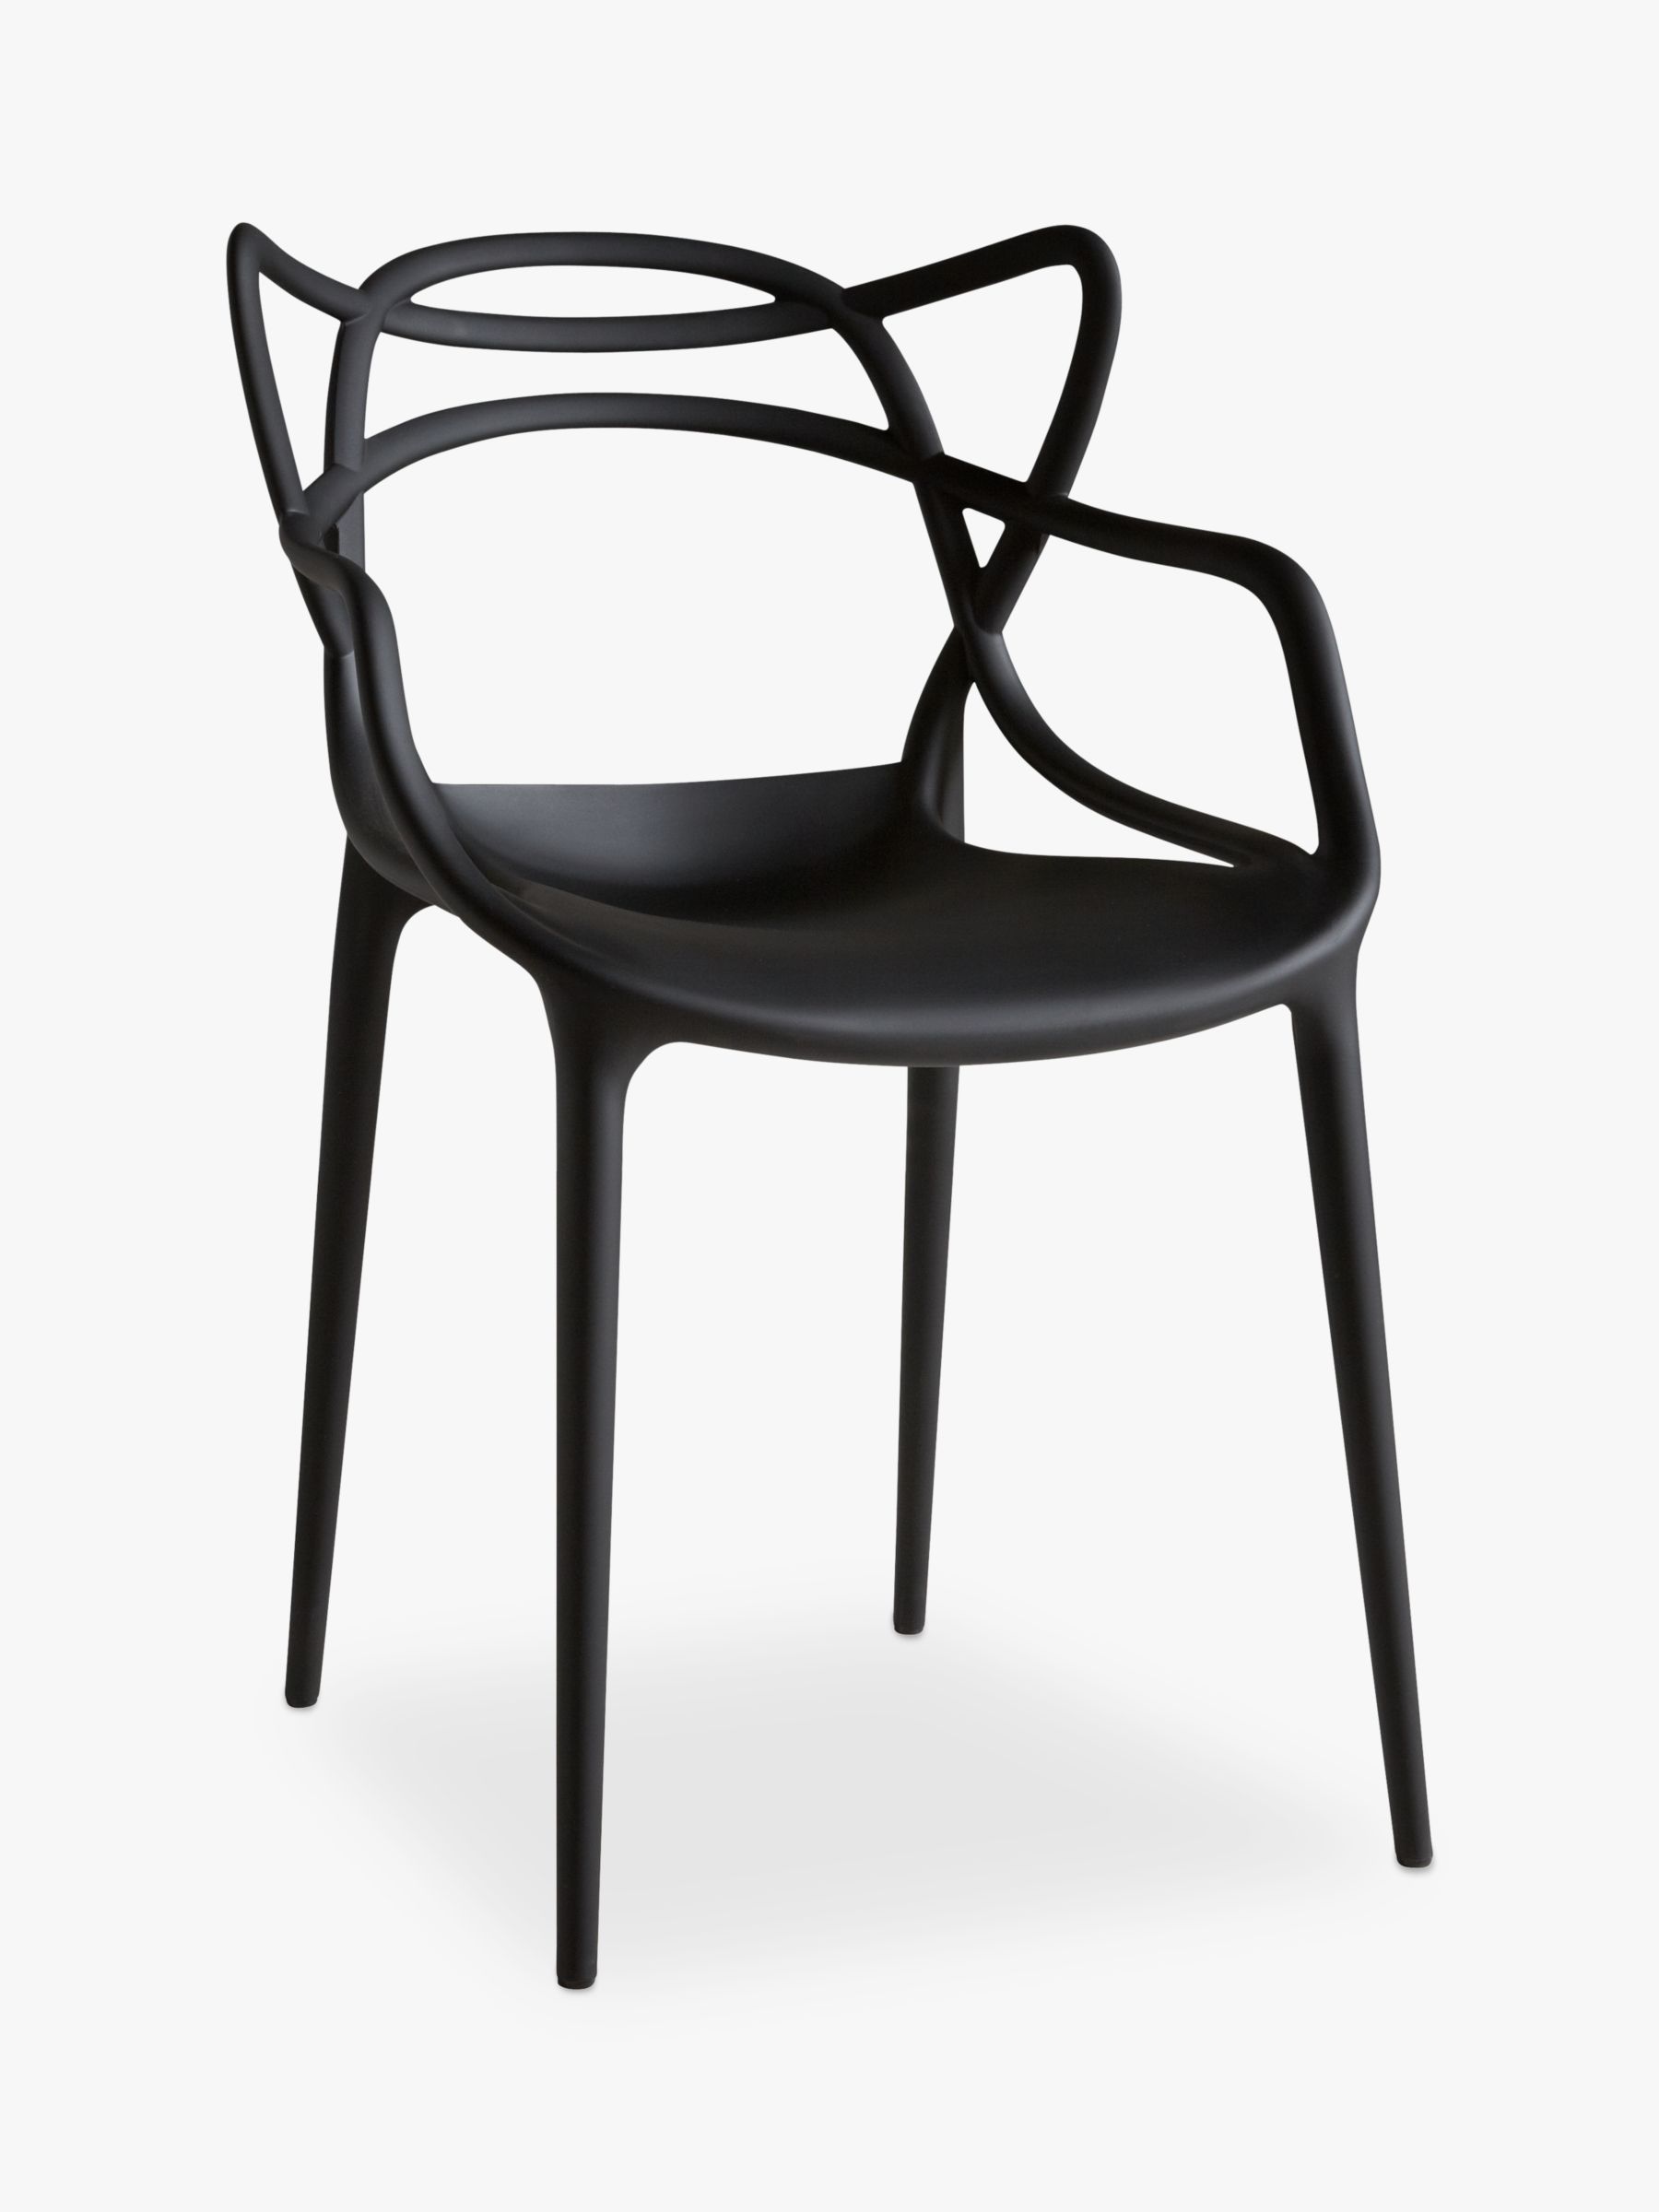 Philippe Starck for Kartell Masters Chair, Black, Pair at John Lewis